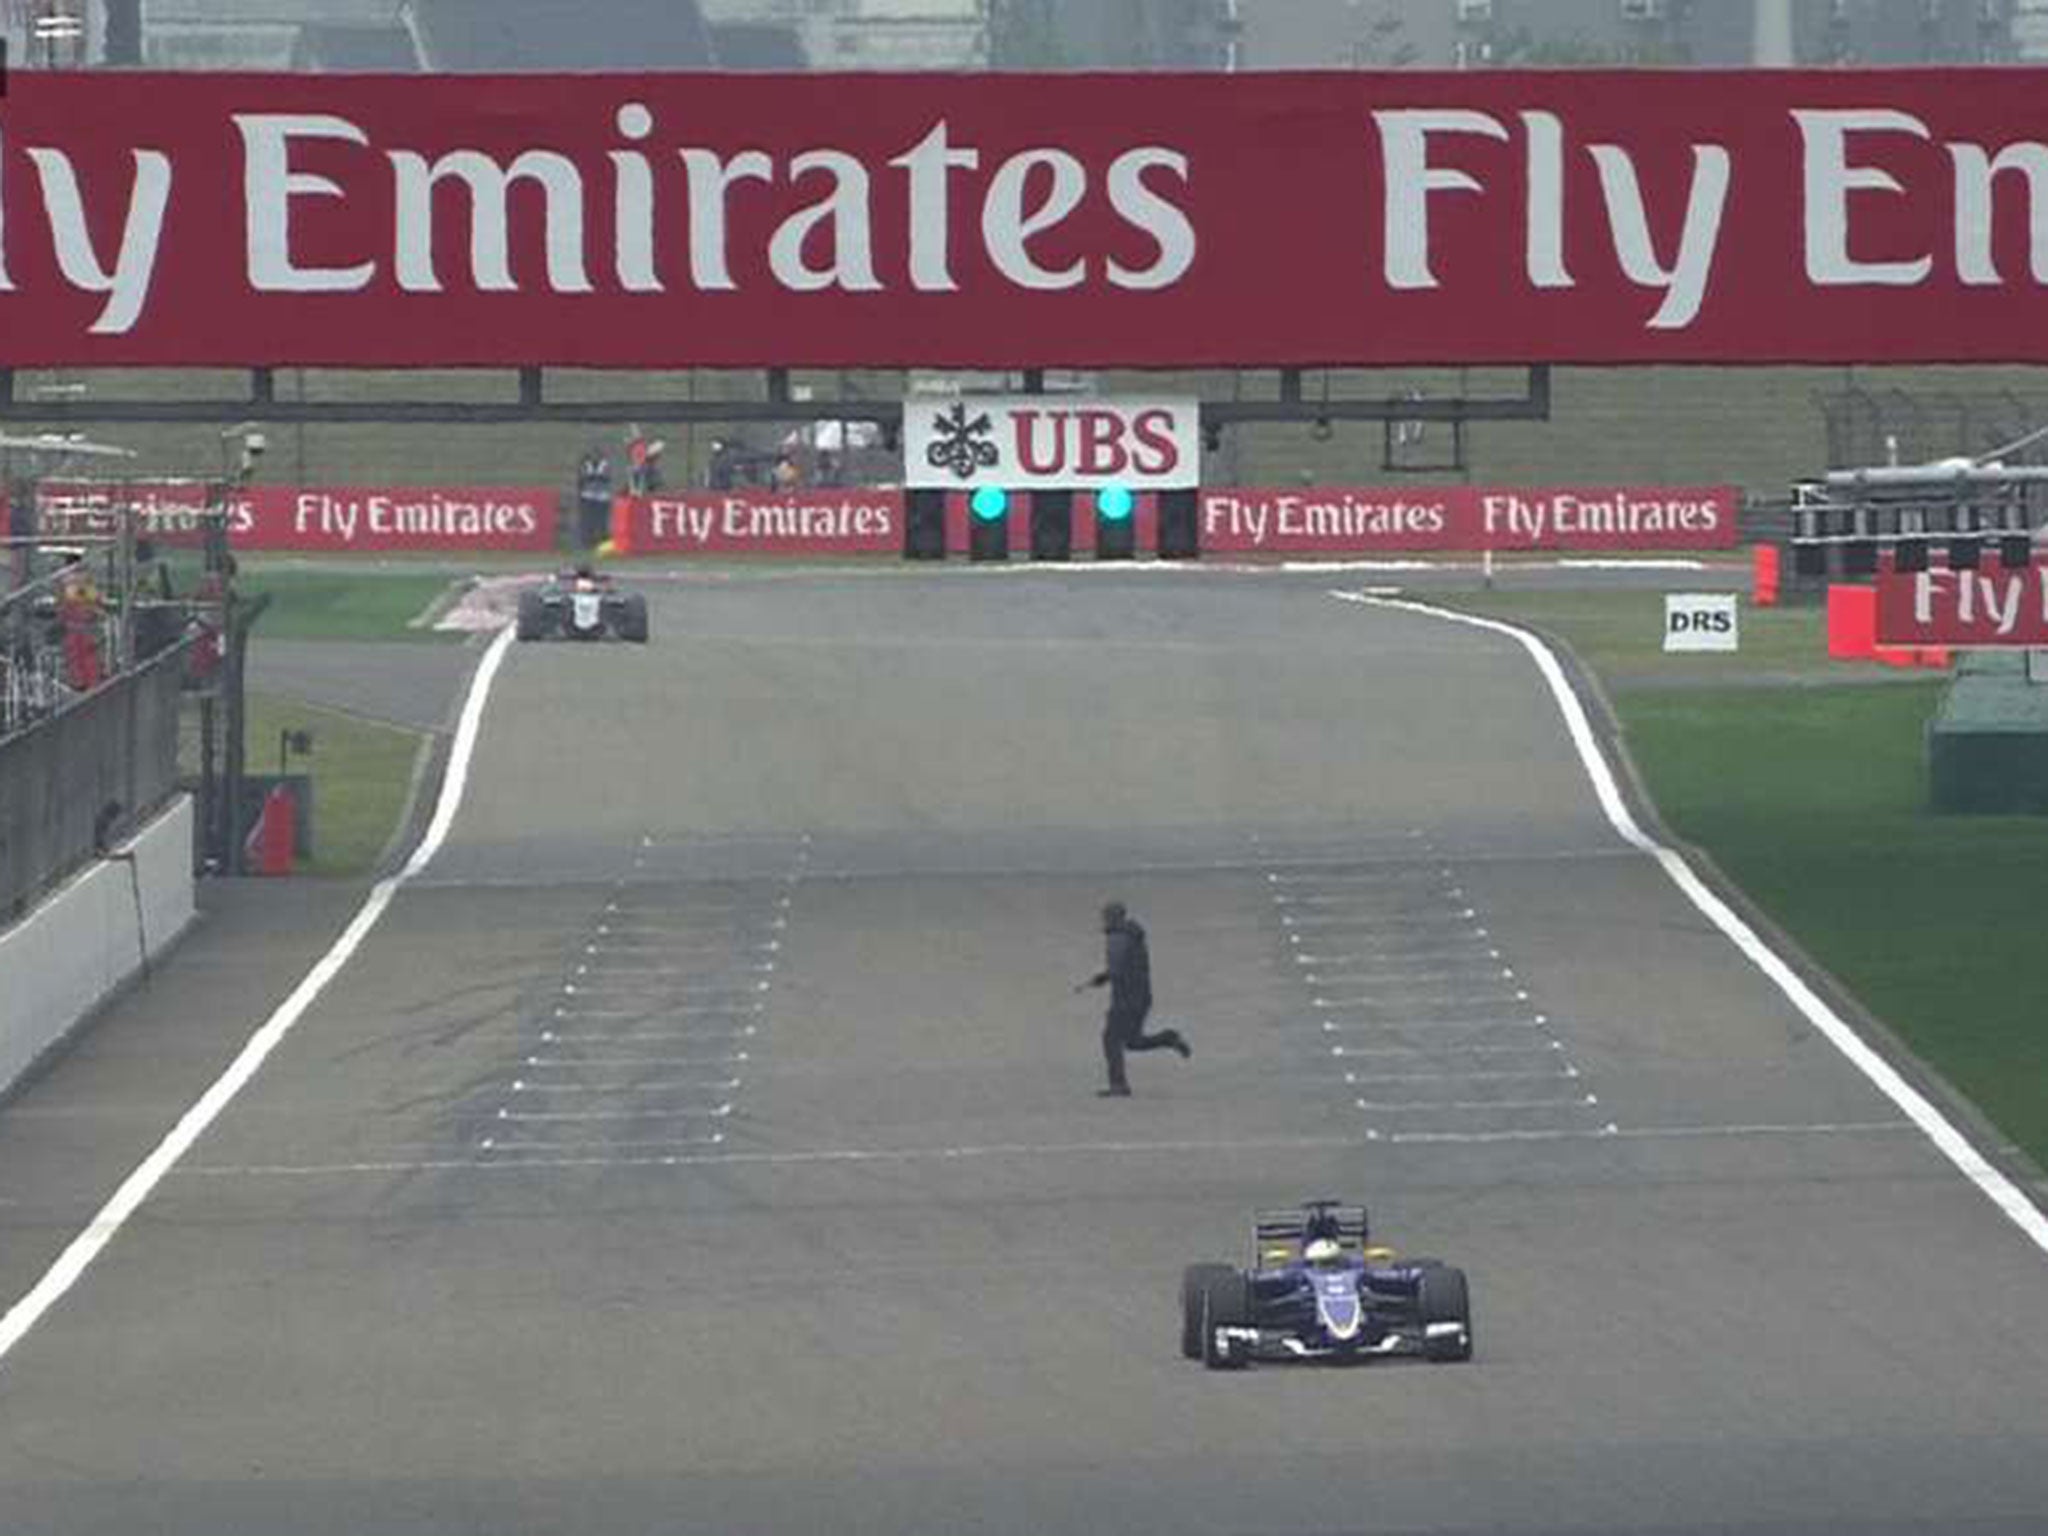 A man runs onto the Shanghai track during second F1 practice